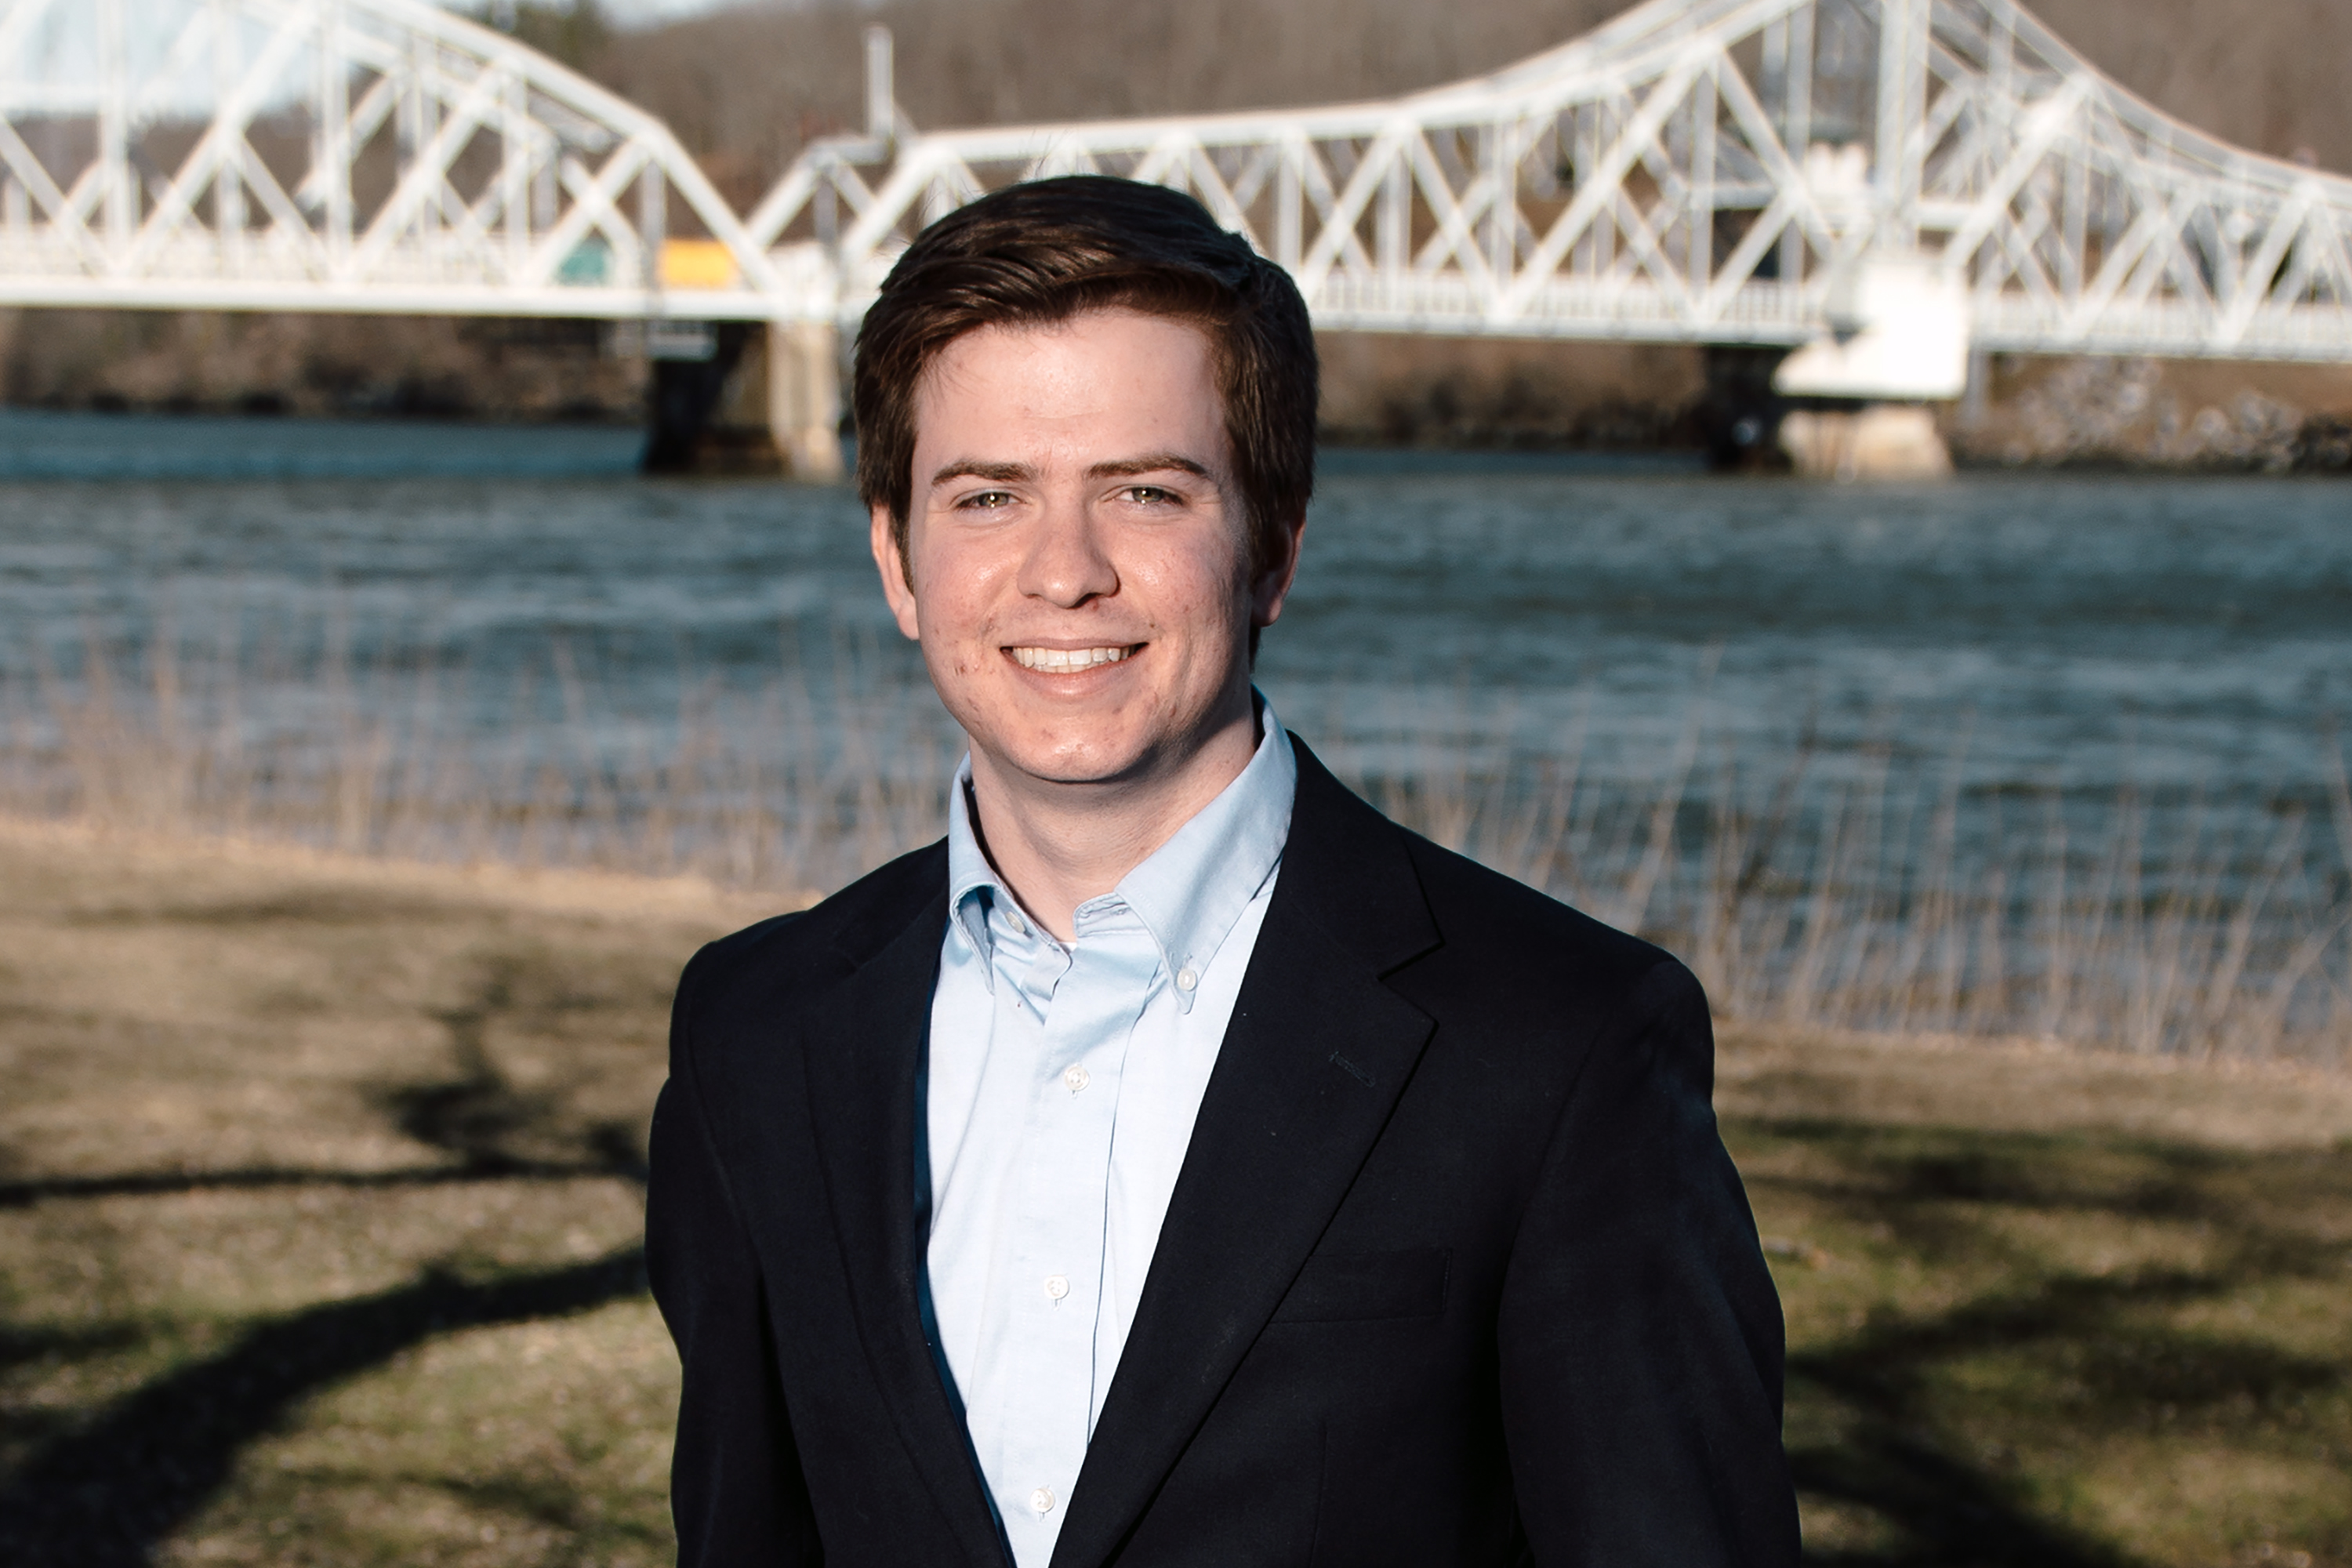 Kevin McMullen, a structural engineering Ph.D. student at UConn, has designed a bridge-safety monitoring device.